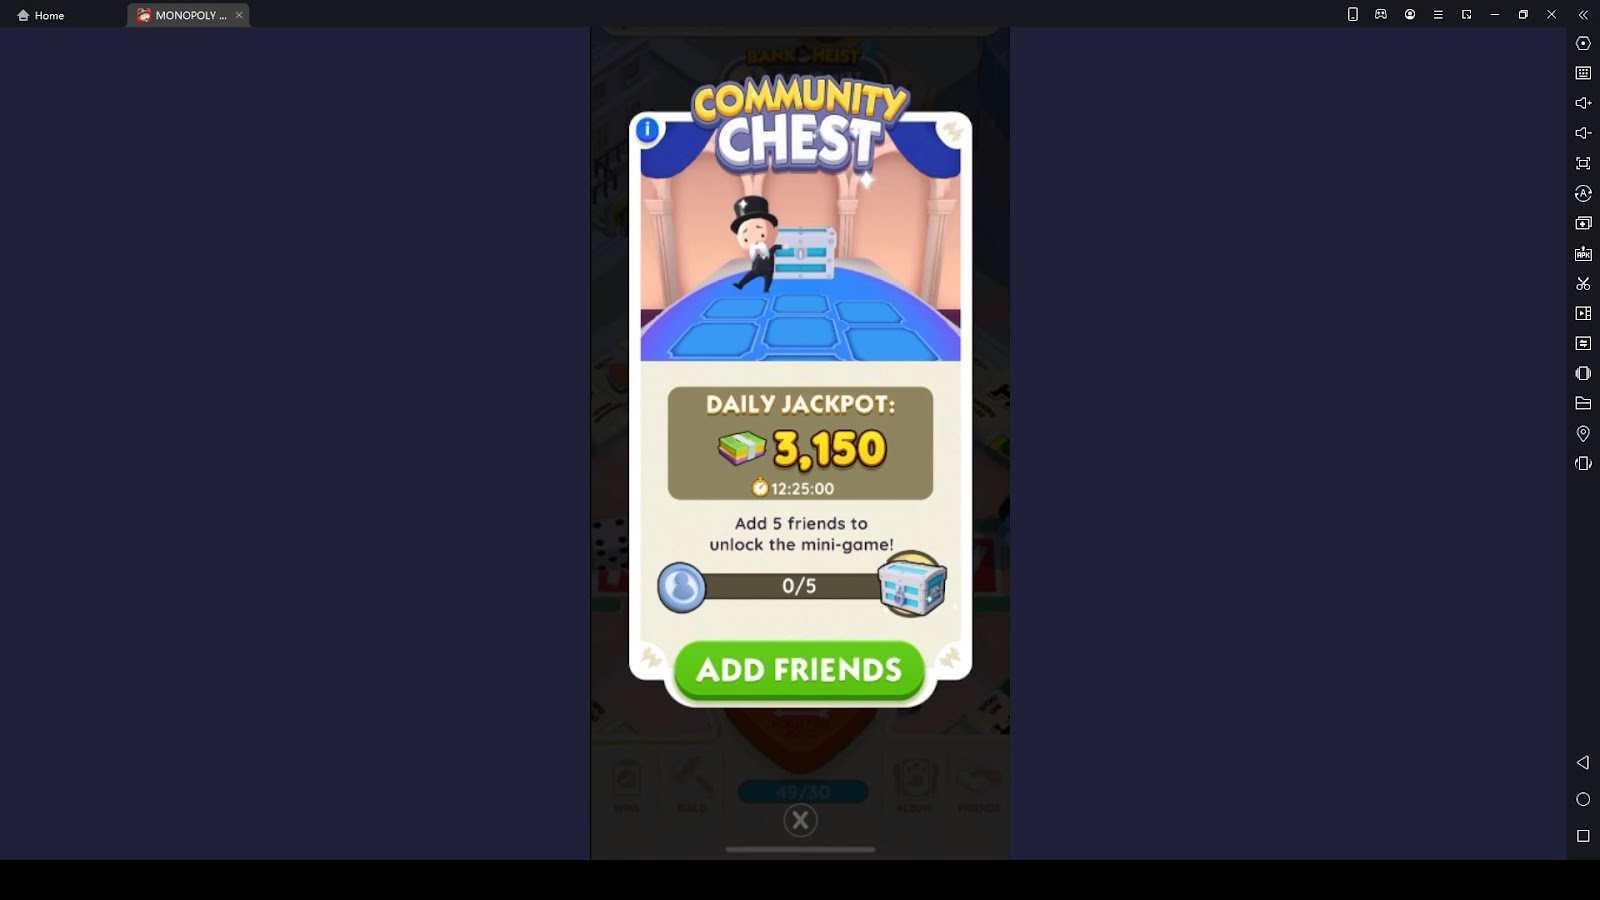 Community Chest Cards